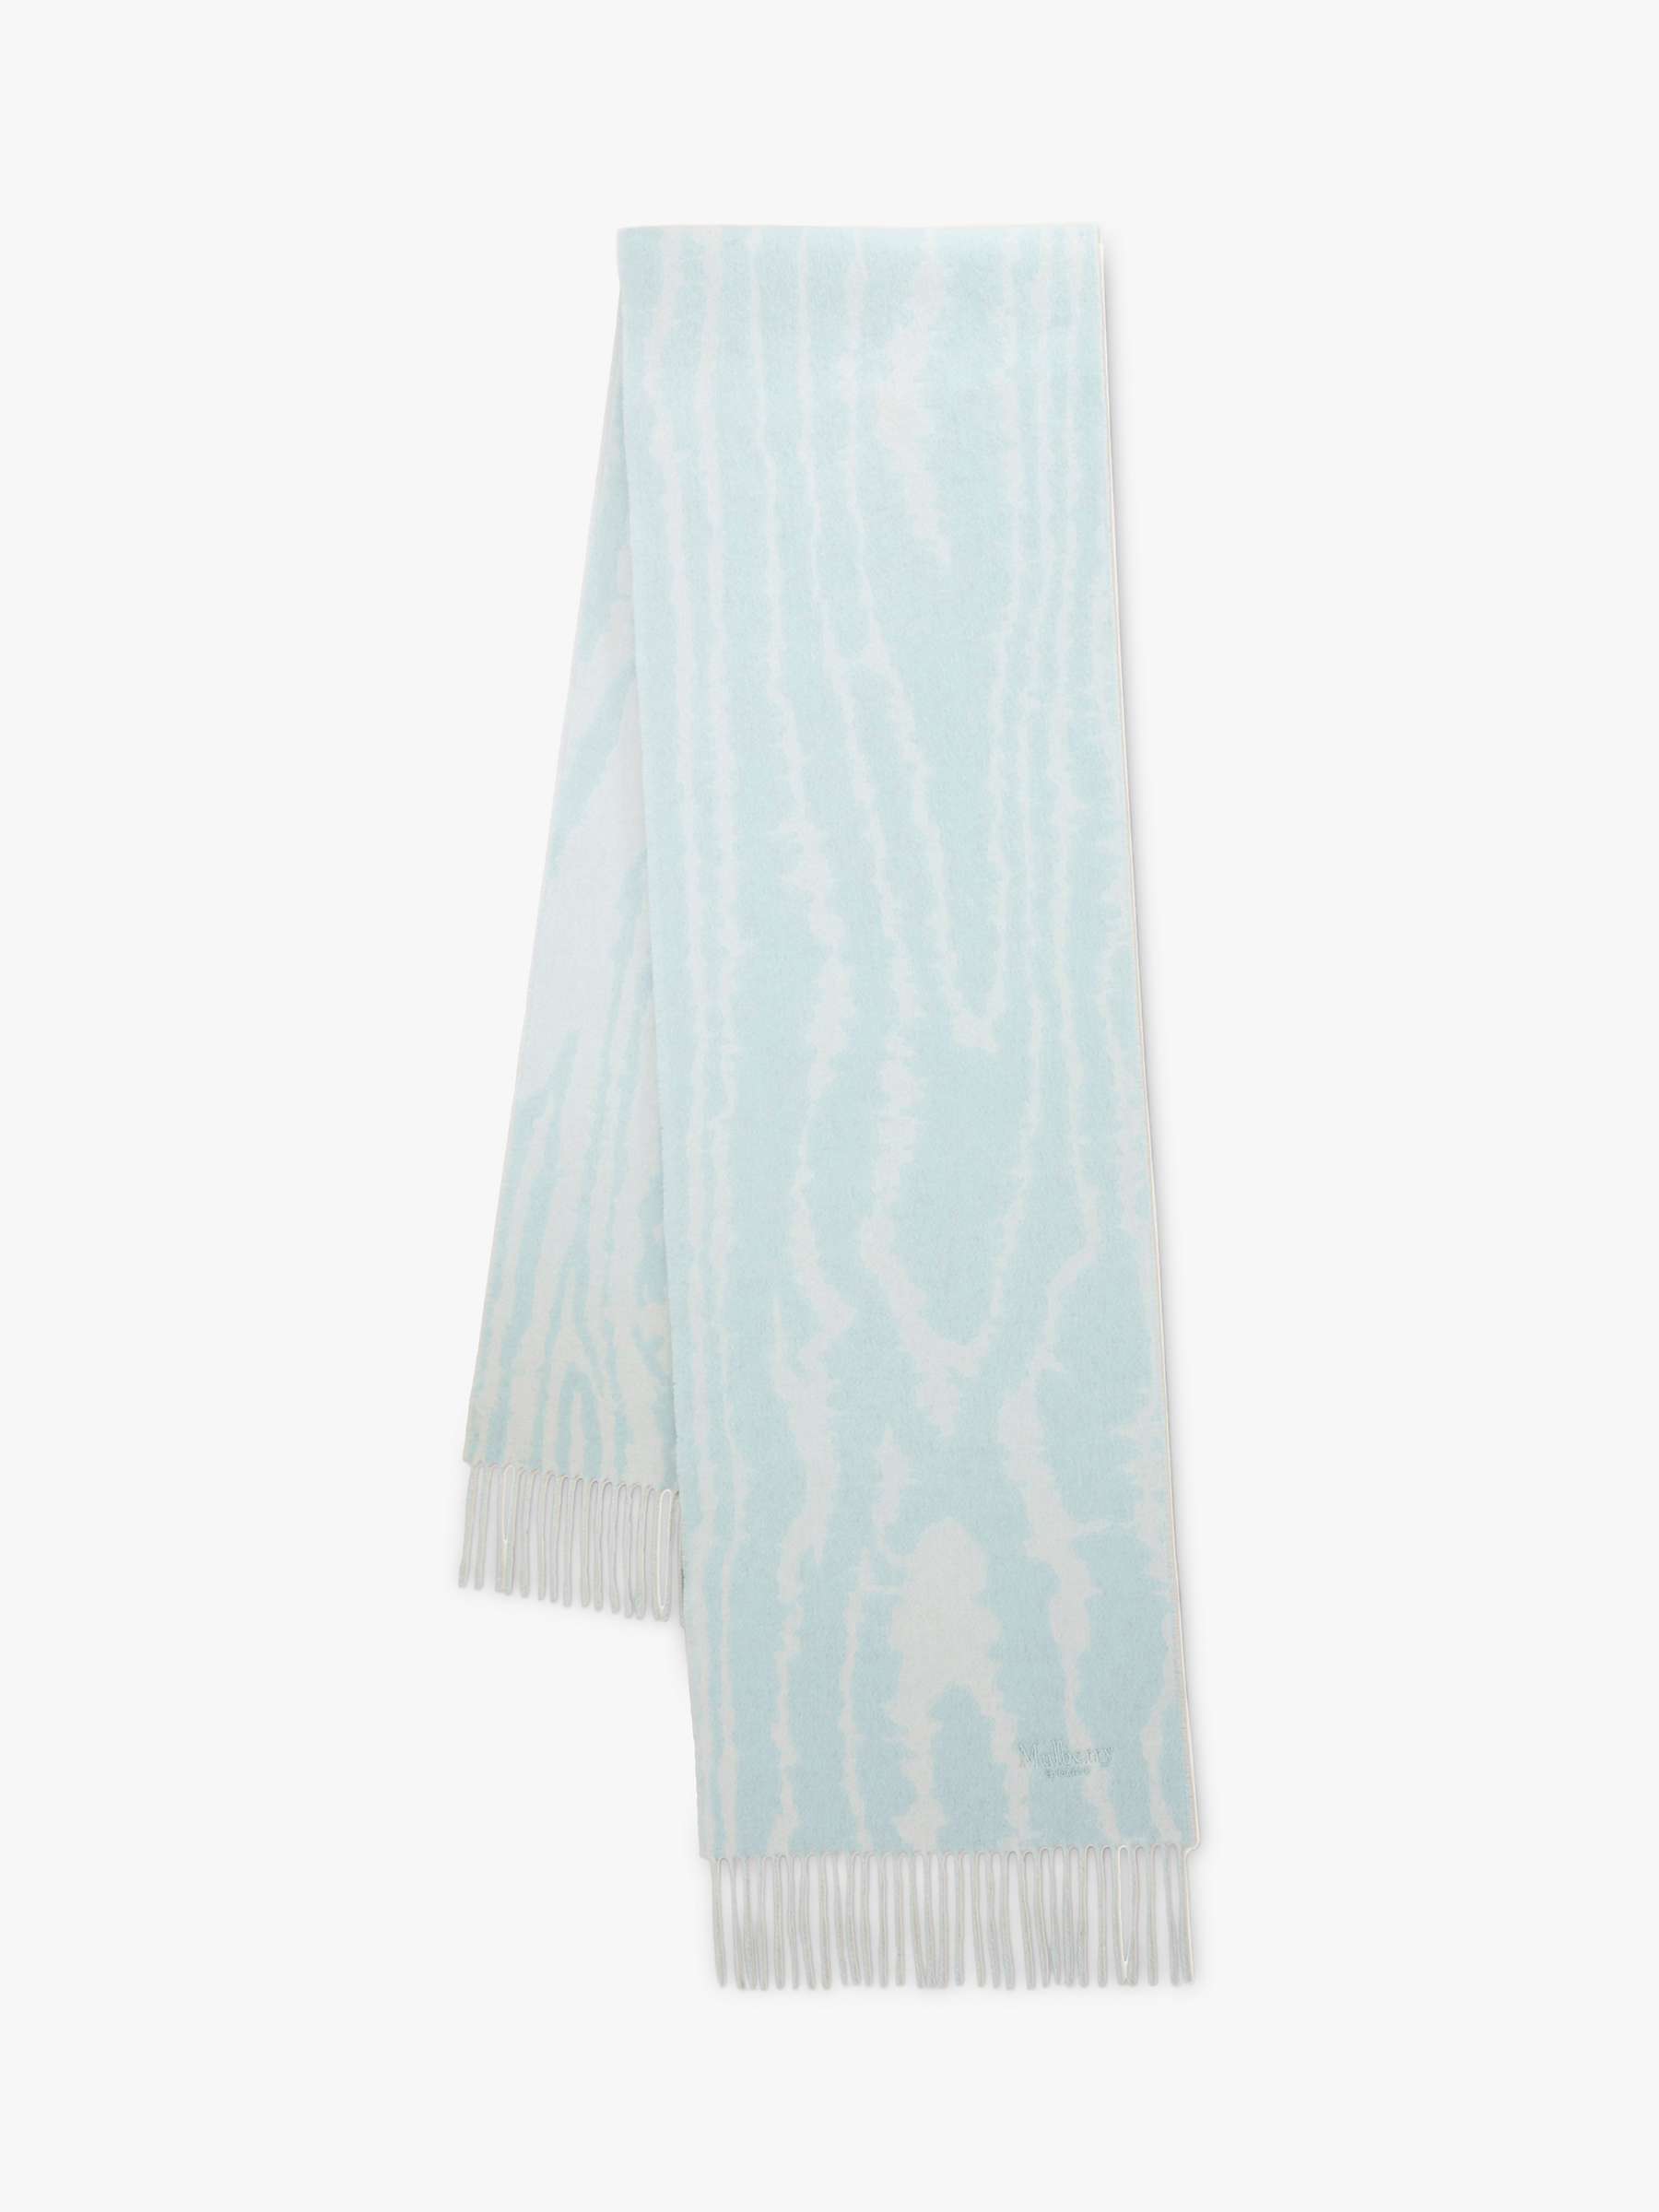 Buy Mulberry Wool Cashmere Moire Scarf Online at johnlewis.com